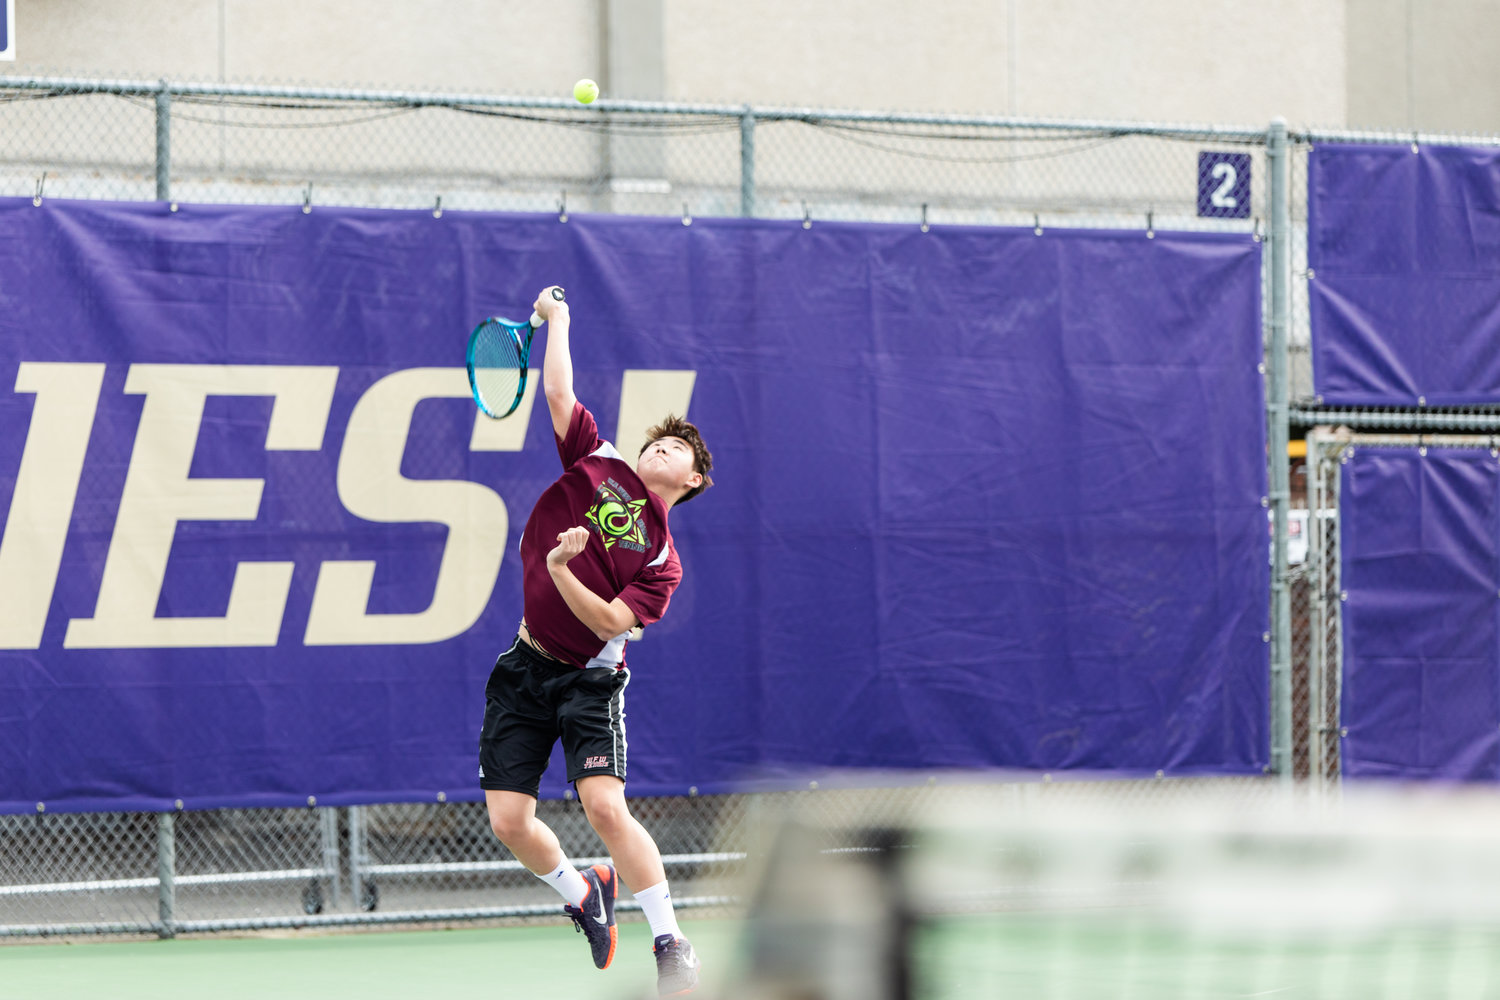 W.F. West's Javyn Han serves during the first set of the 2A boys' singles tennis state competition on May 27, 2022.